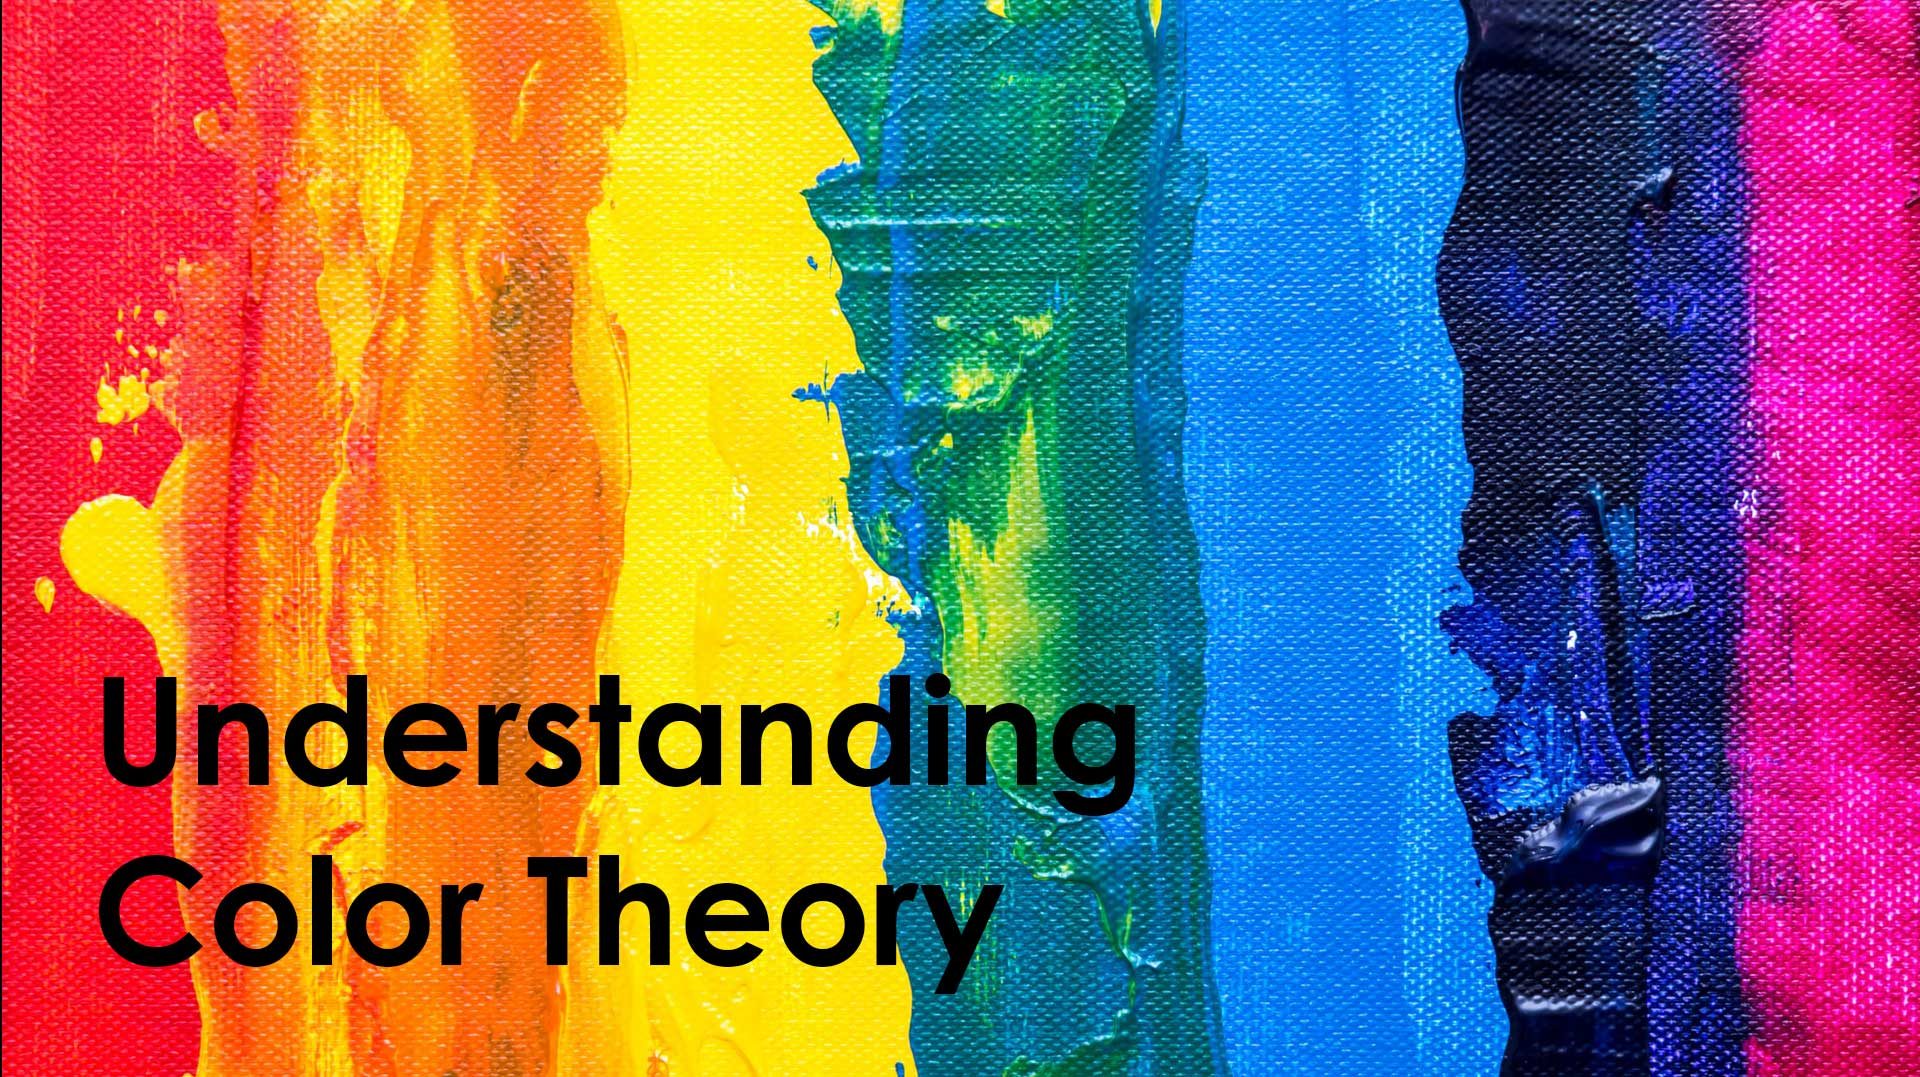 understanding-color-theory-banner